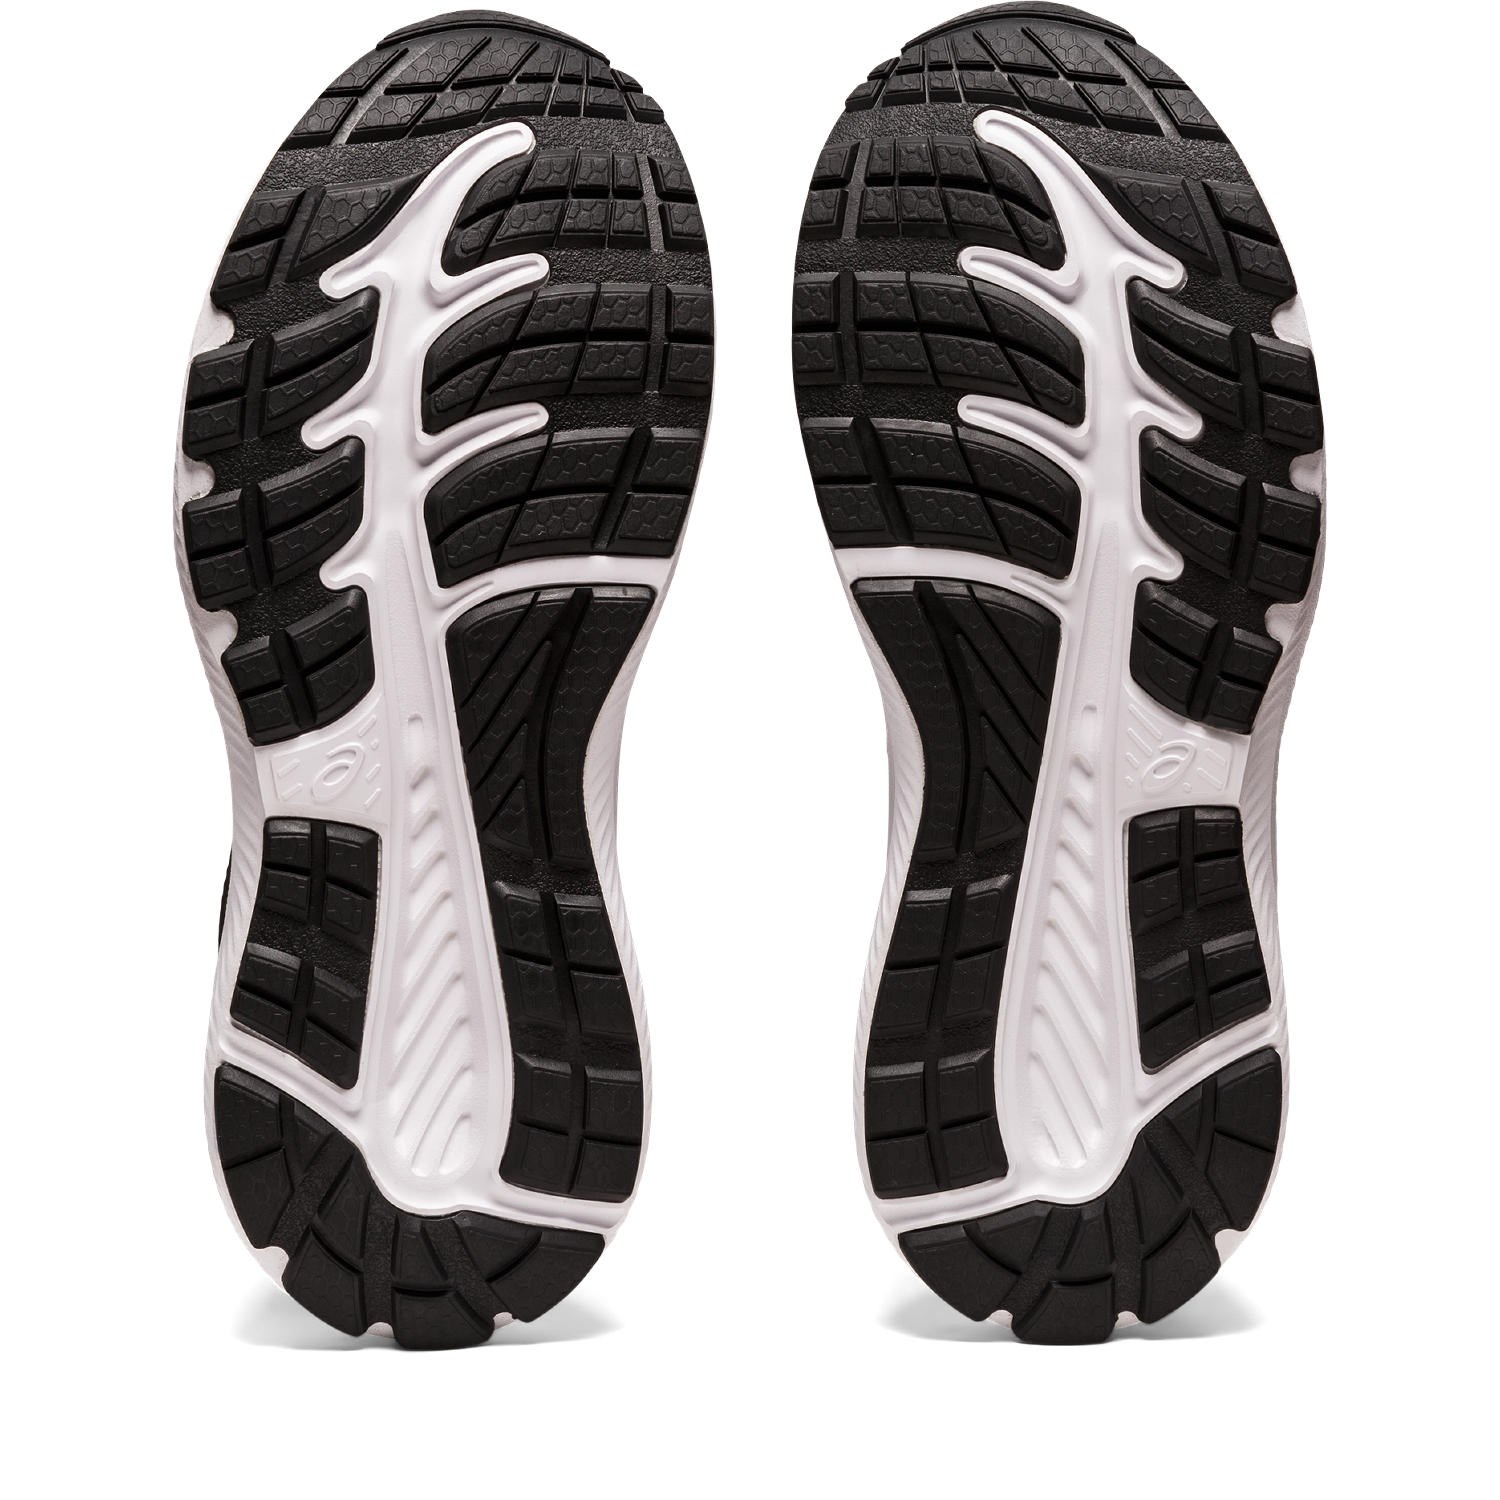 Asics Contend 8 GS - Kids Running Shoes - Black/White | Sportitude